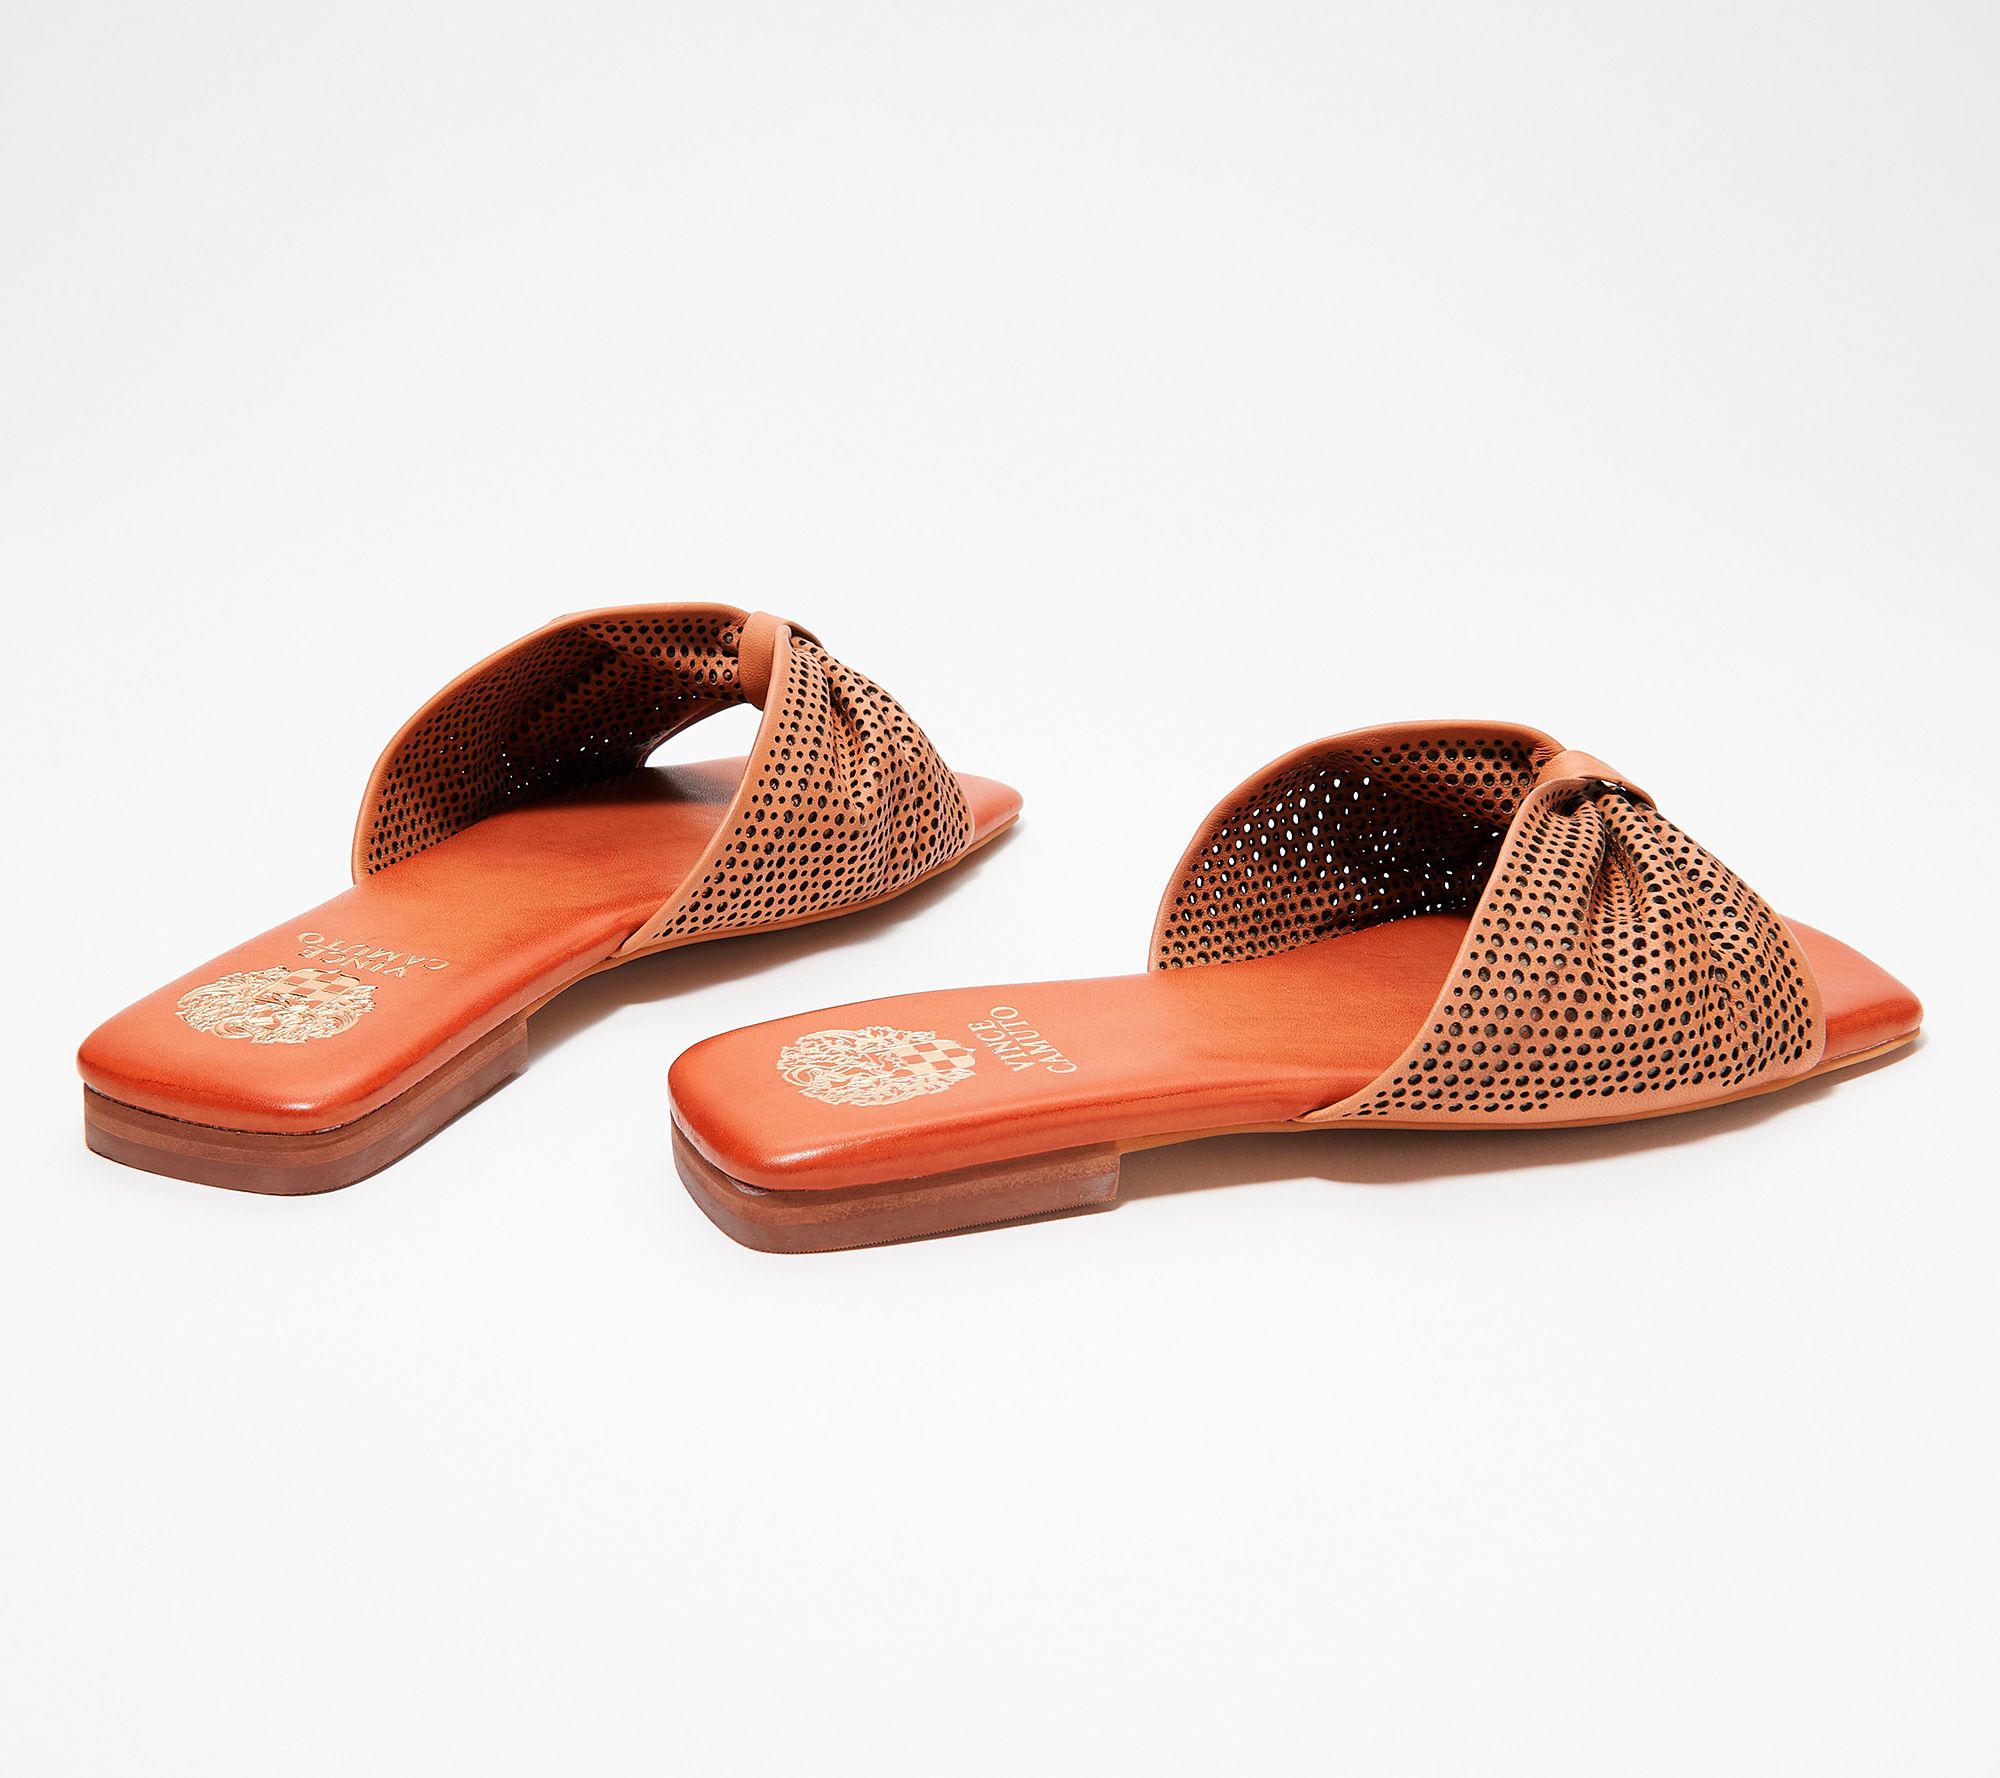 Vince Camuto Perforated Leather Thong Sandals - Amahlee - QVC.com